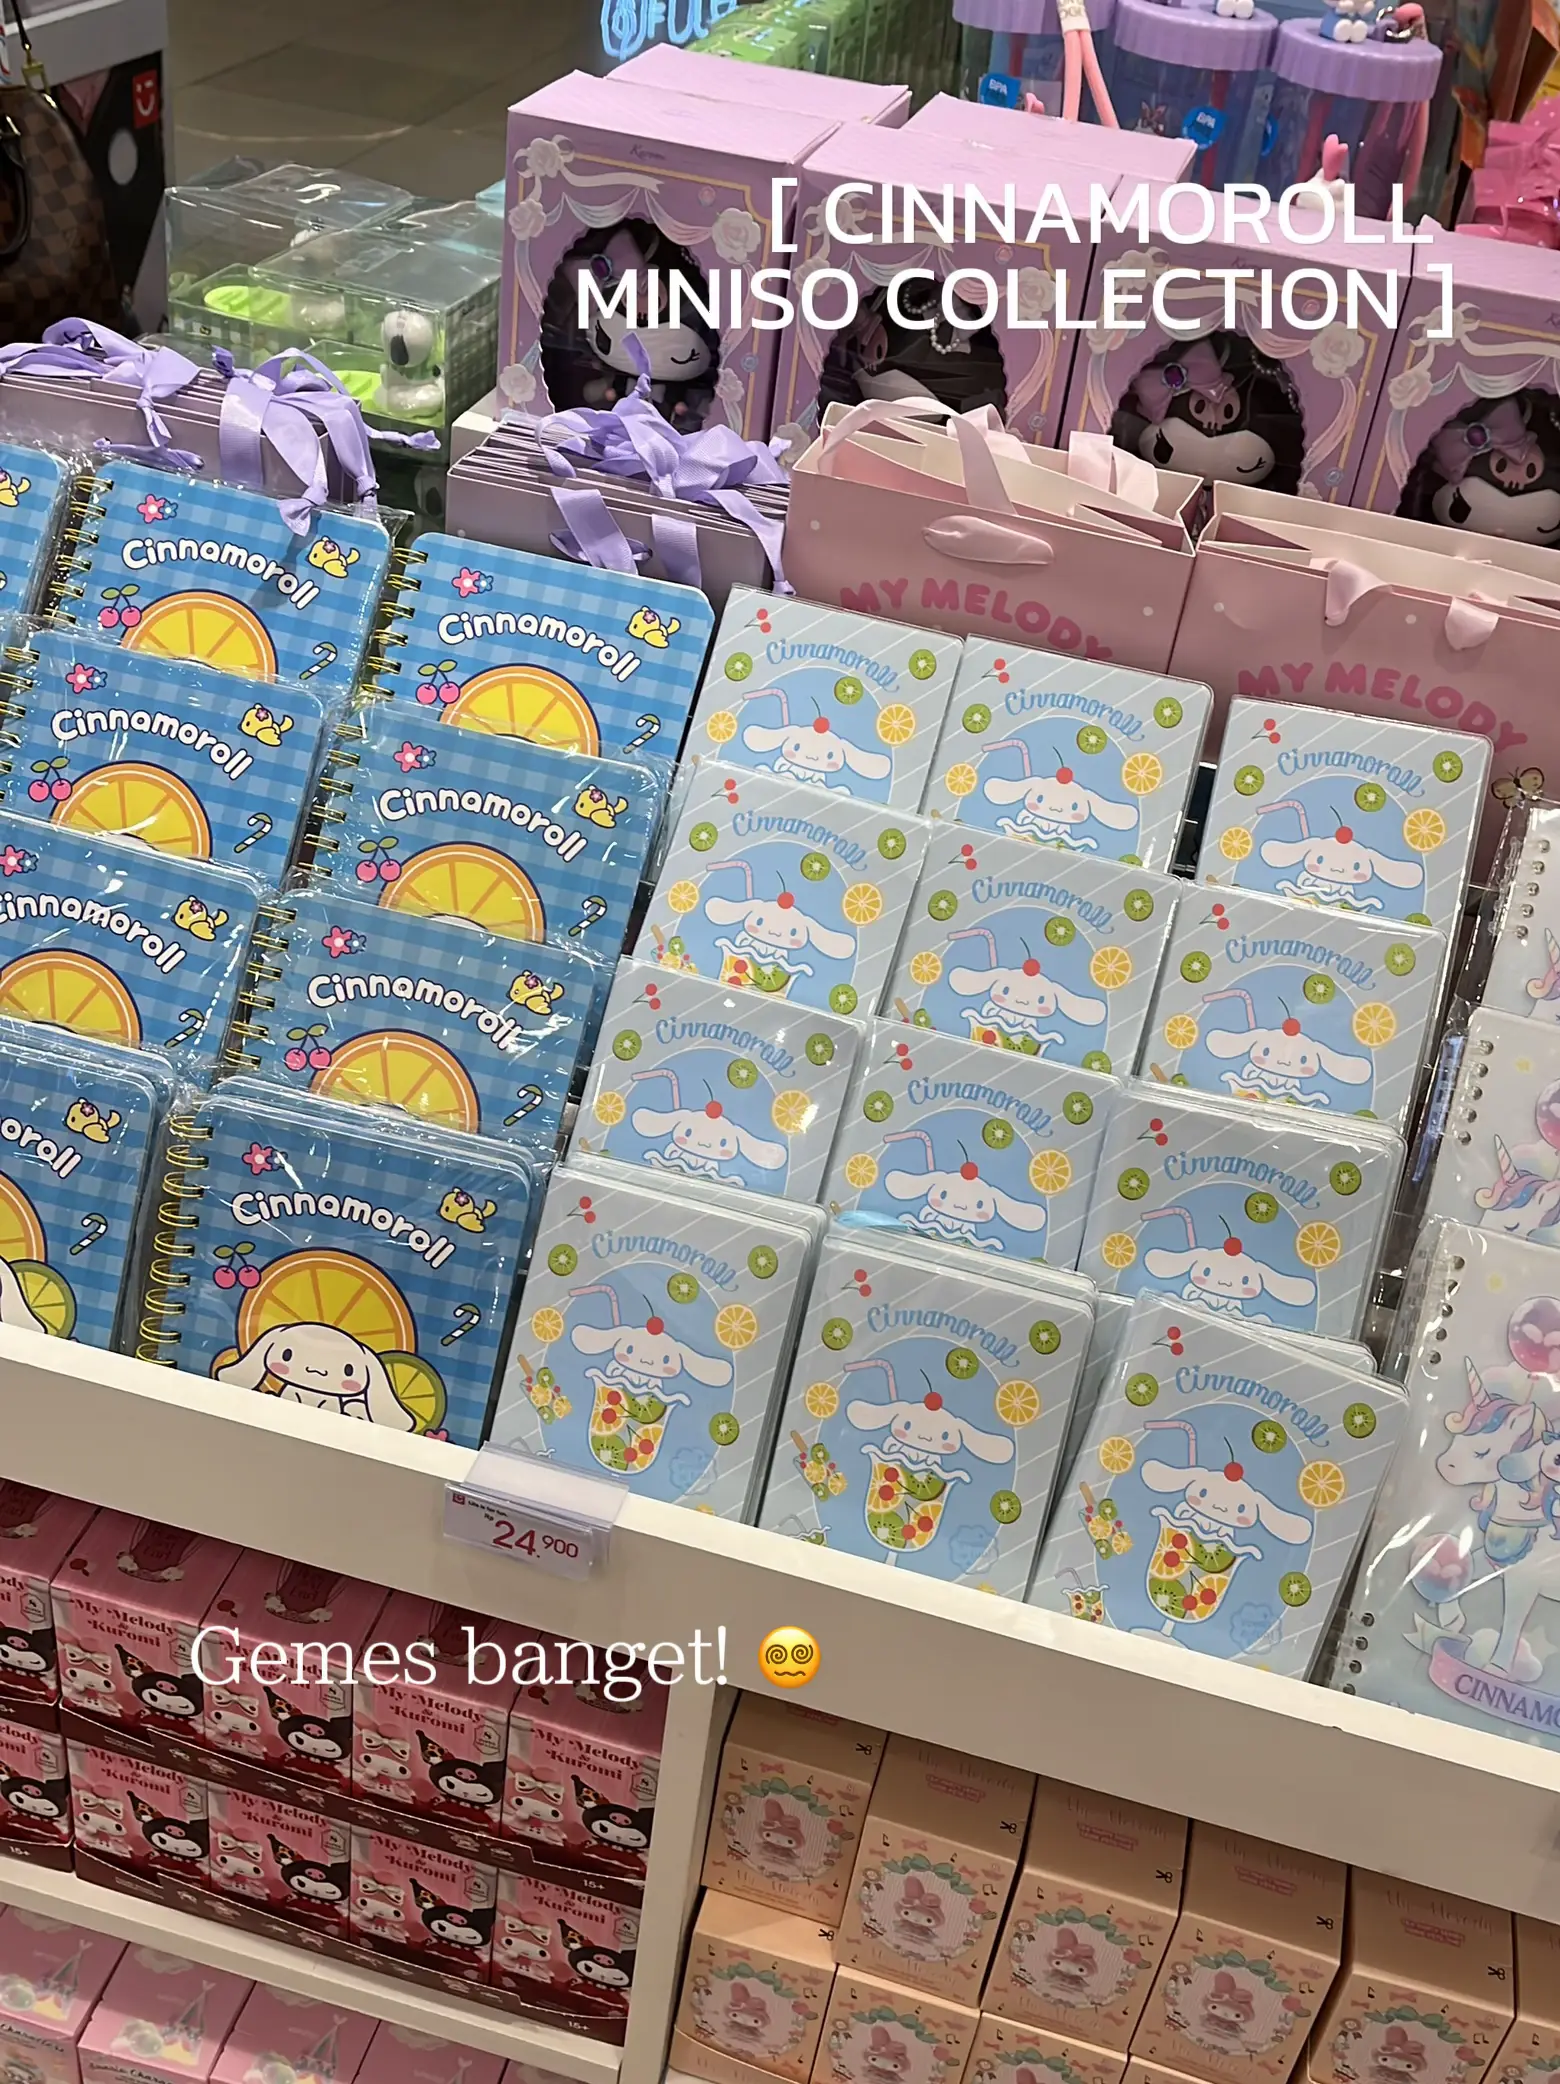 Little trip to @miniso.official 🎀🩵 Has got to be the cutest